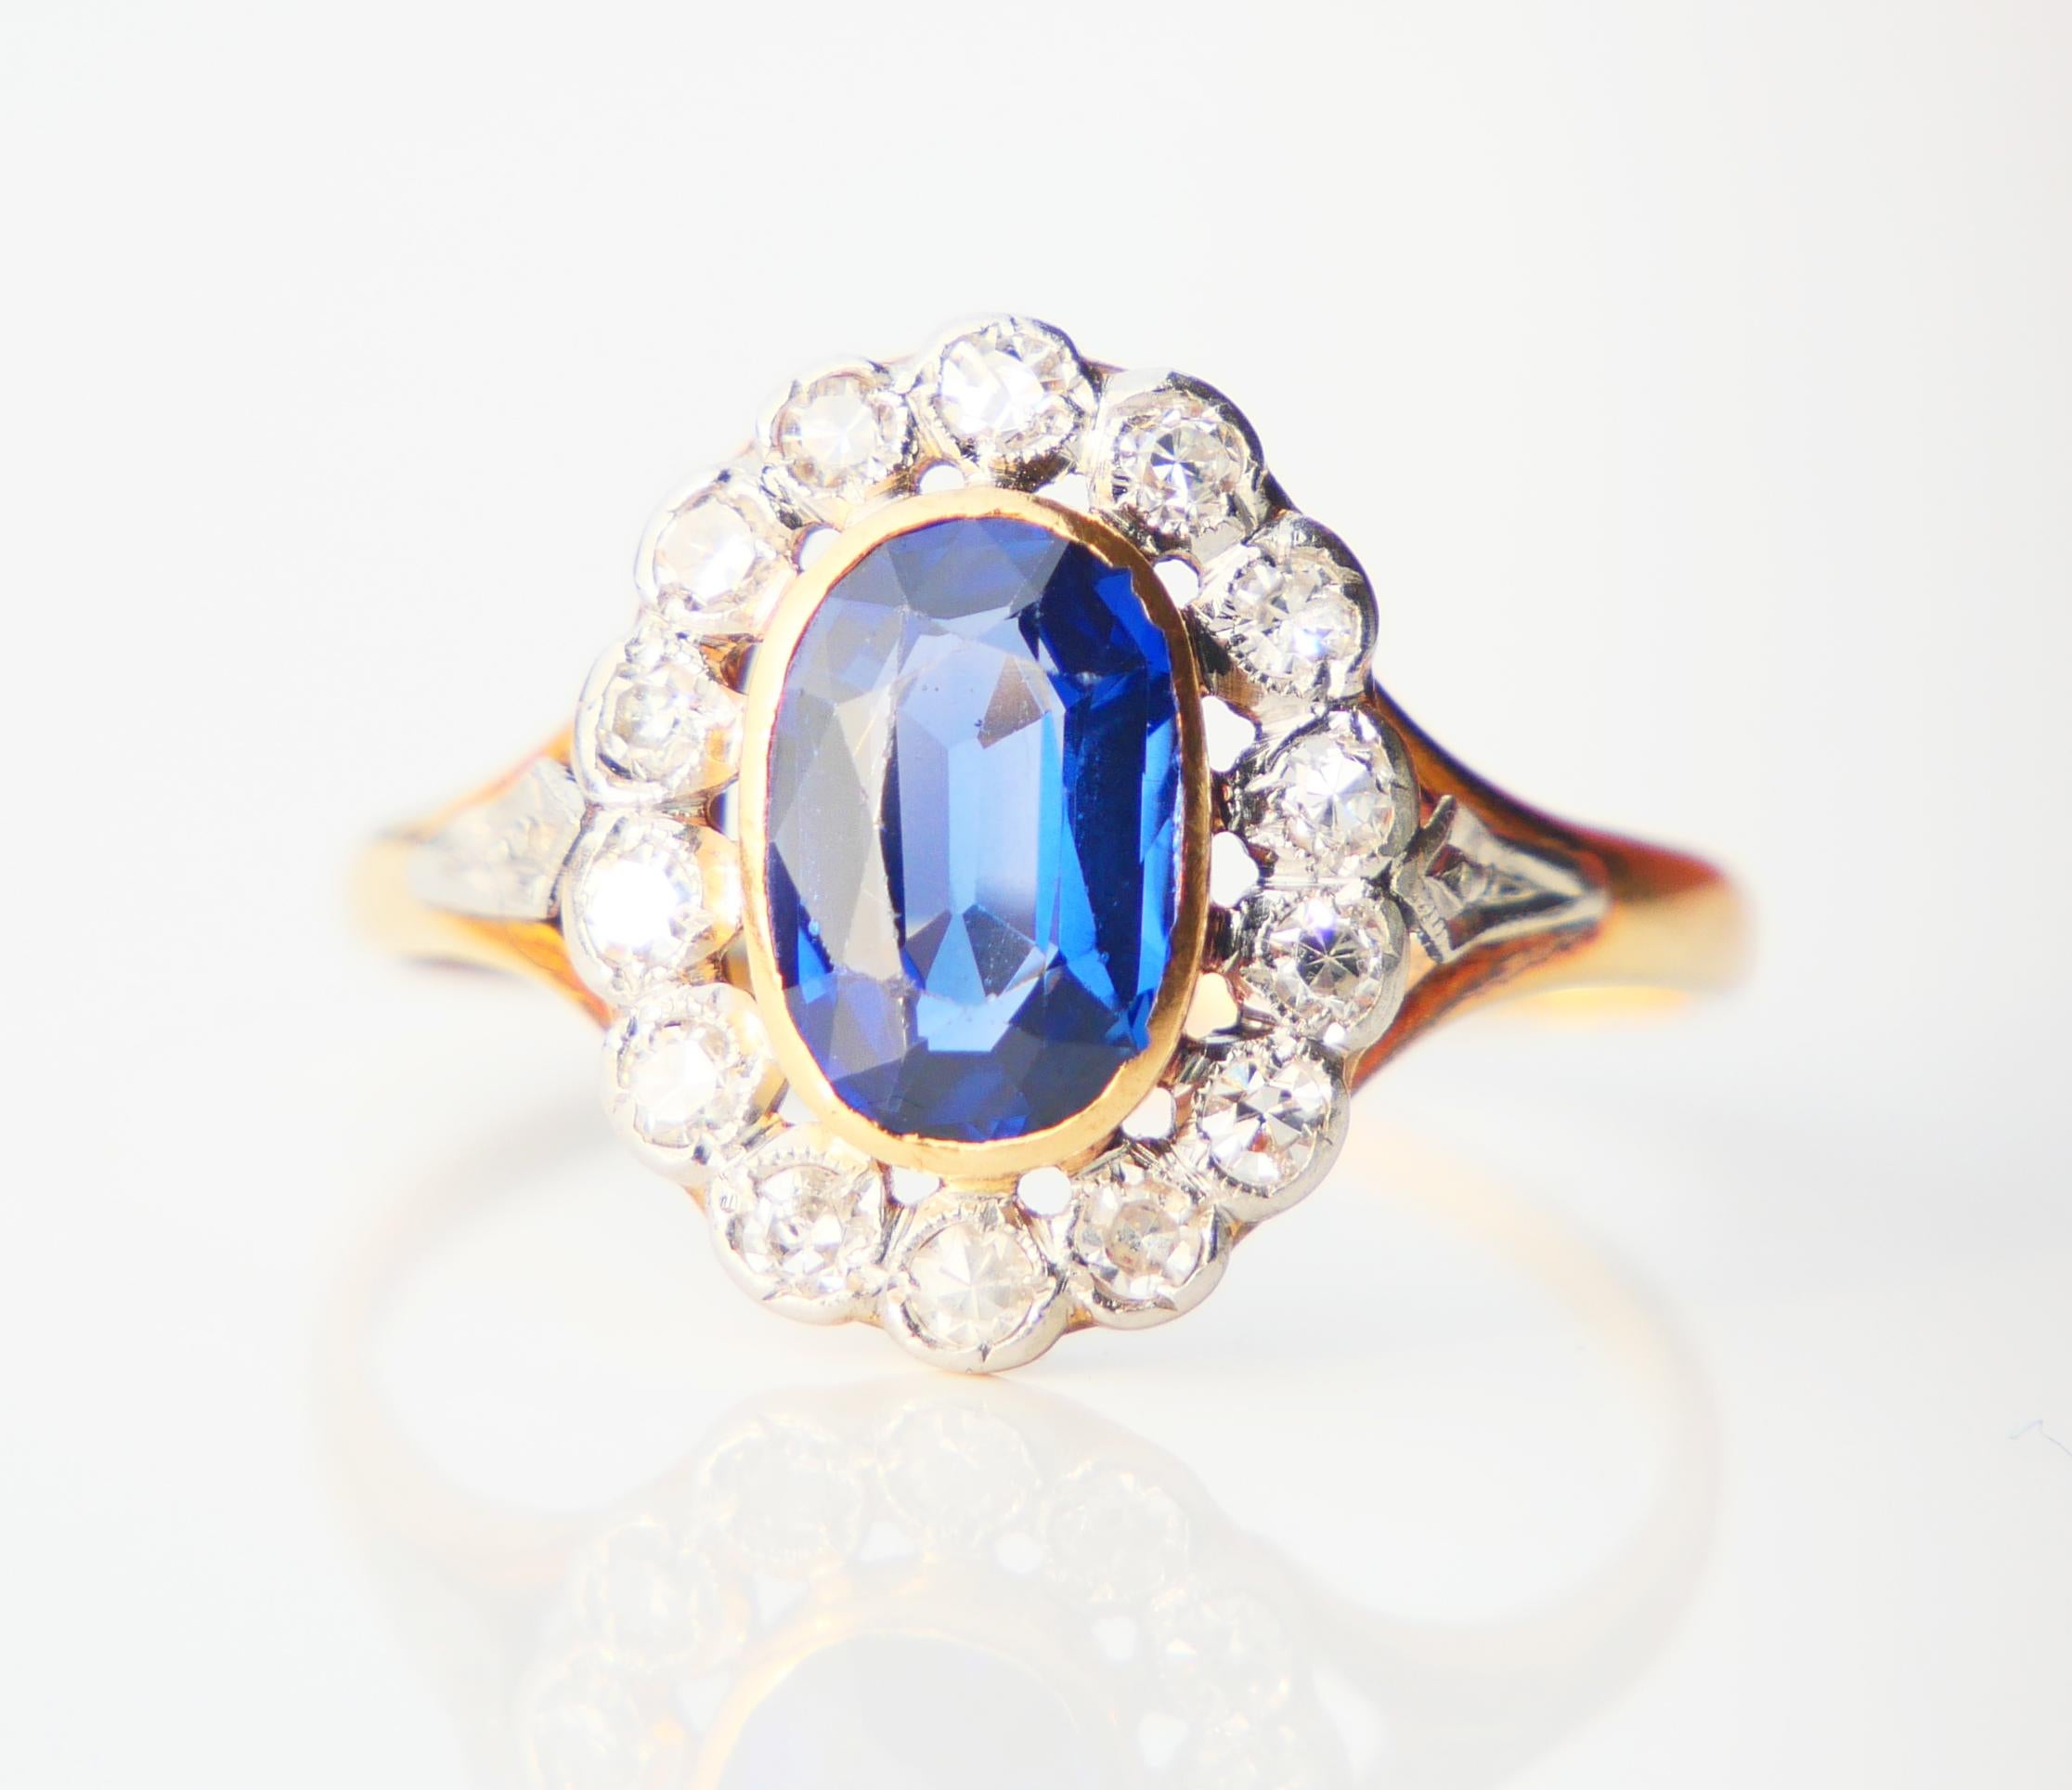 Beautiful Halo Ring from ca. 1920s -1930s in solid 18K Yellow Gold with lab-made Blue Sapphire and 14 natural Diamonds in Platinum settings.

Sapphire of oval cut, color is medium Blue, measures: 9 mm mm x 6 mm / ca. 1.85 ct .

14 natural Diamonds